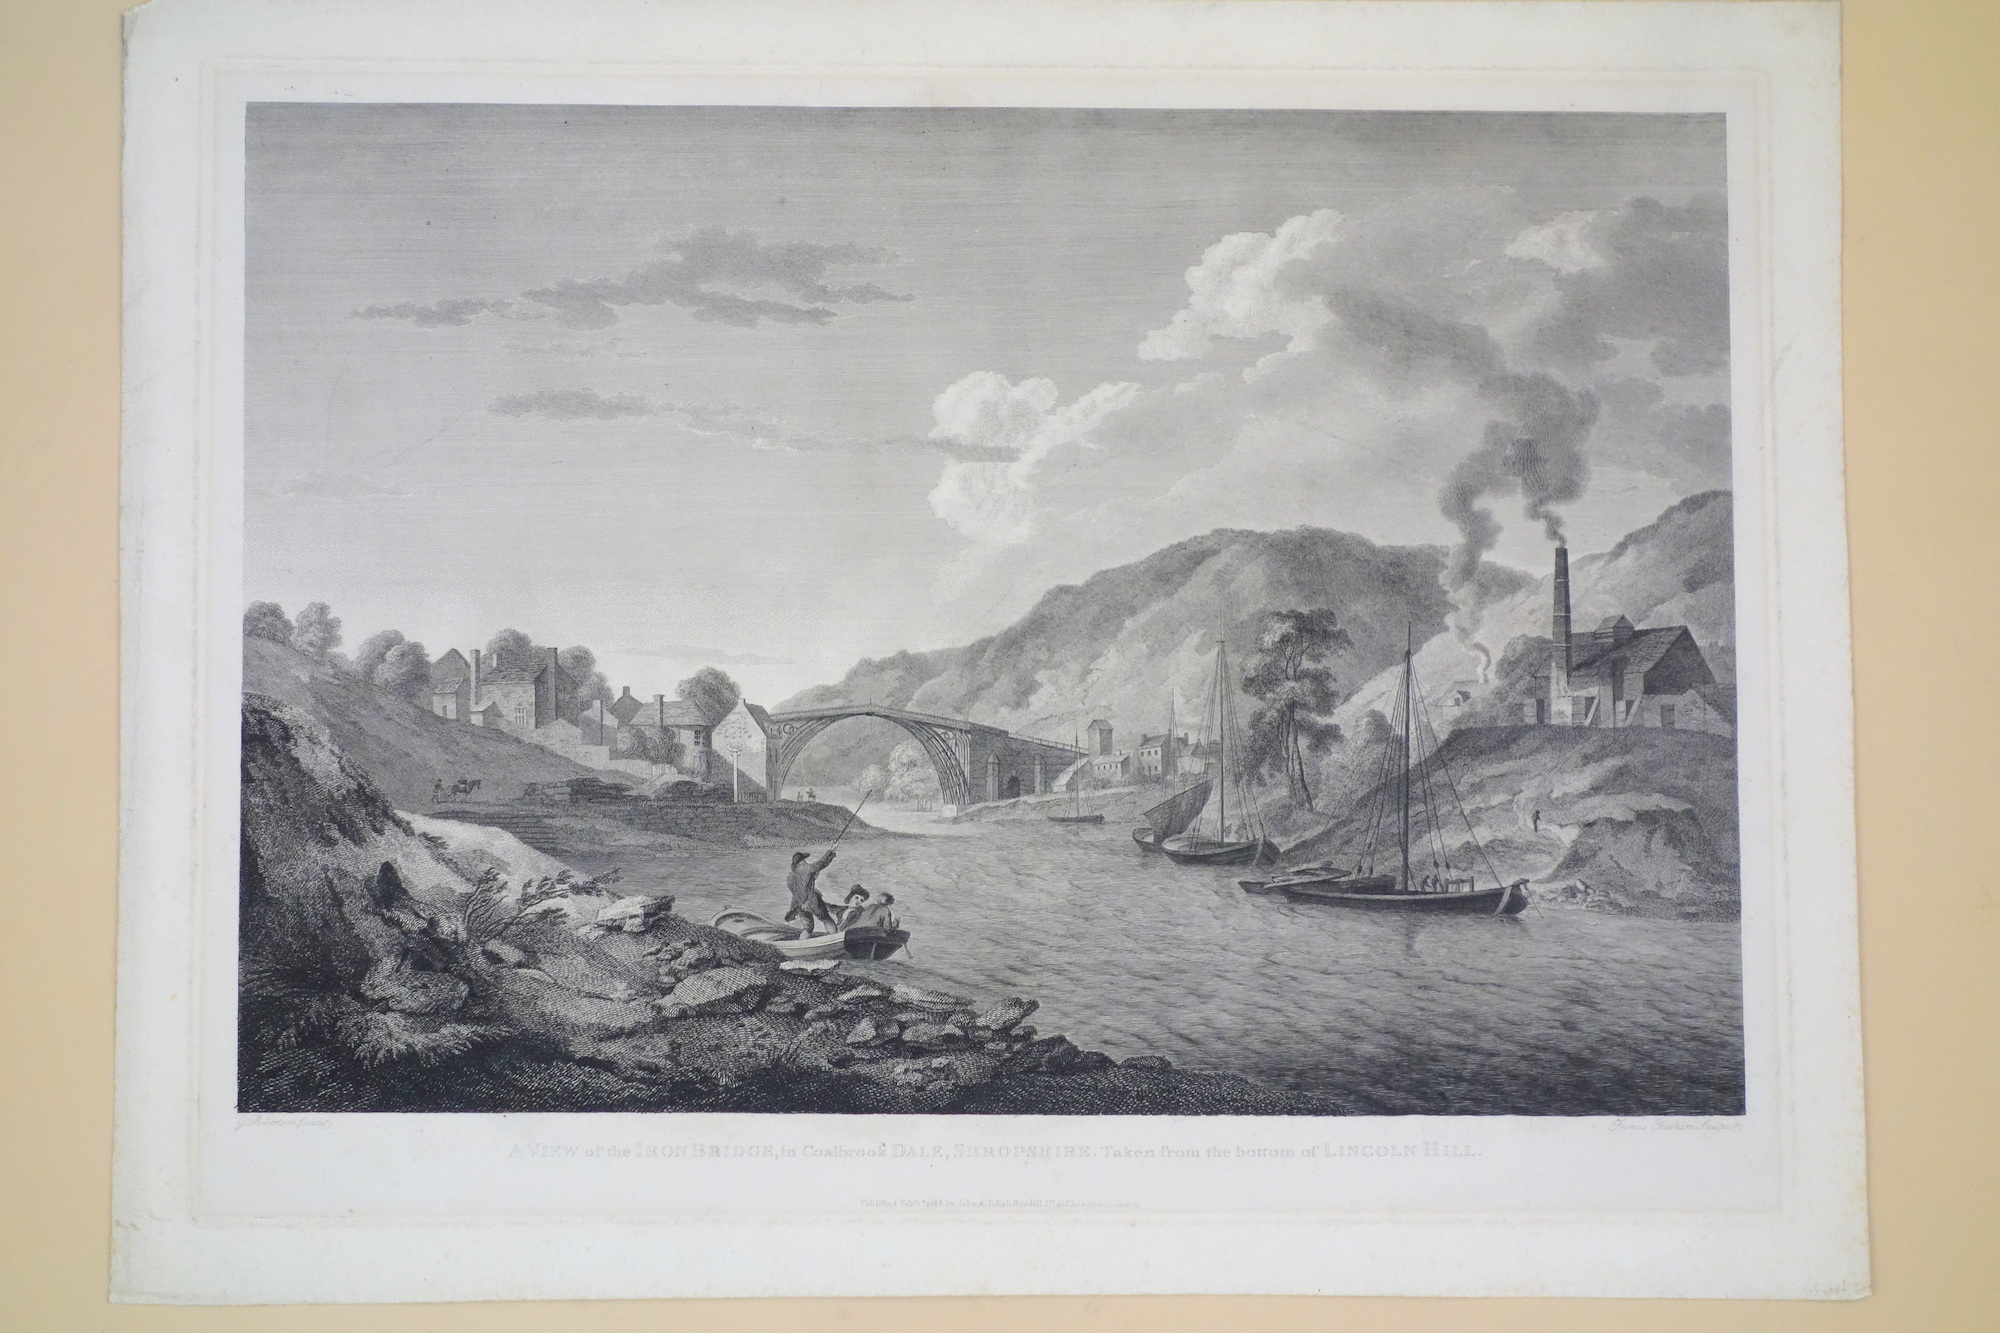 A View of the Iron Bridge, in Coalbrook DALE, SHROPSHIRE, Taken from the bottom of LINCOLN HILL (1788) engraved by Francis Grisham after George Robertson.